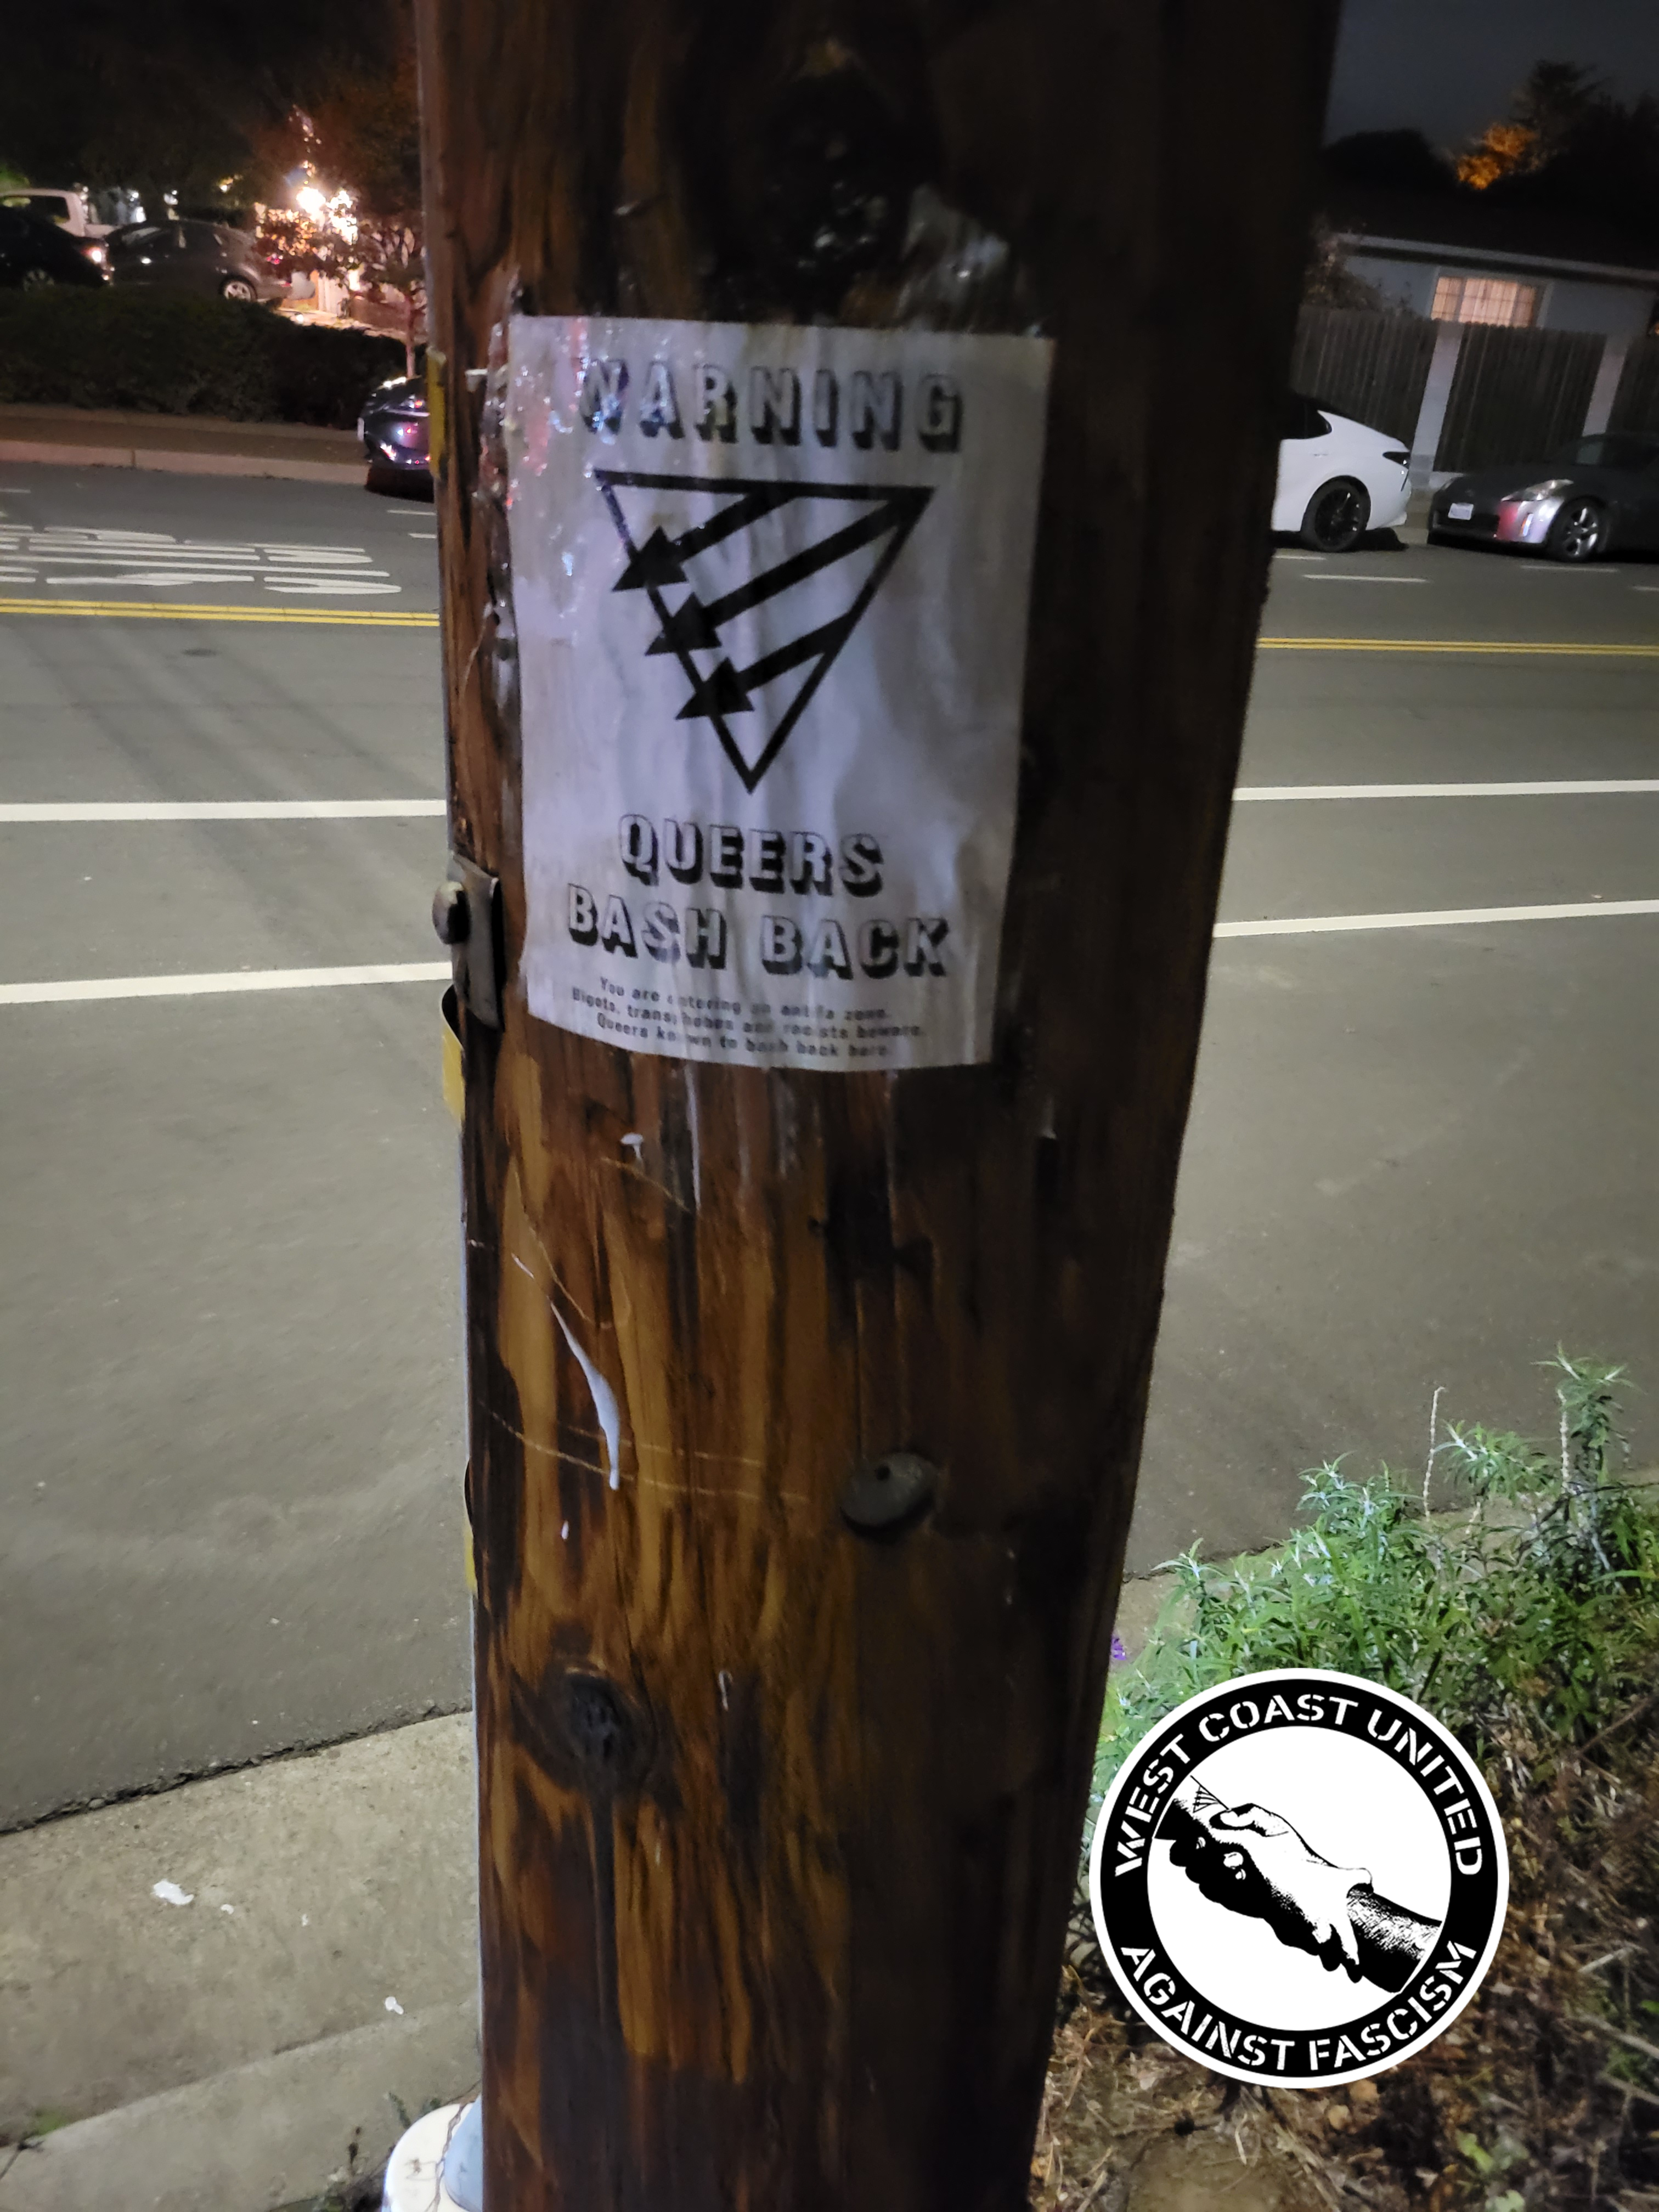 A wooden post has a flyer attached to it. It reads "Warning, Queers Bash Back" with a Queer Front symbol on it, a triangle with three arrows.